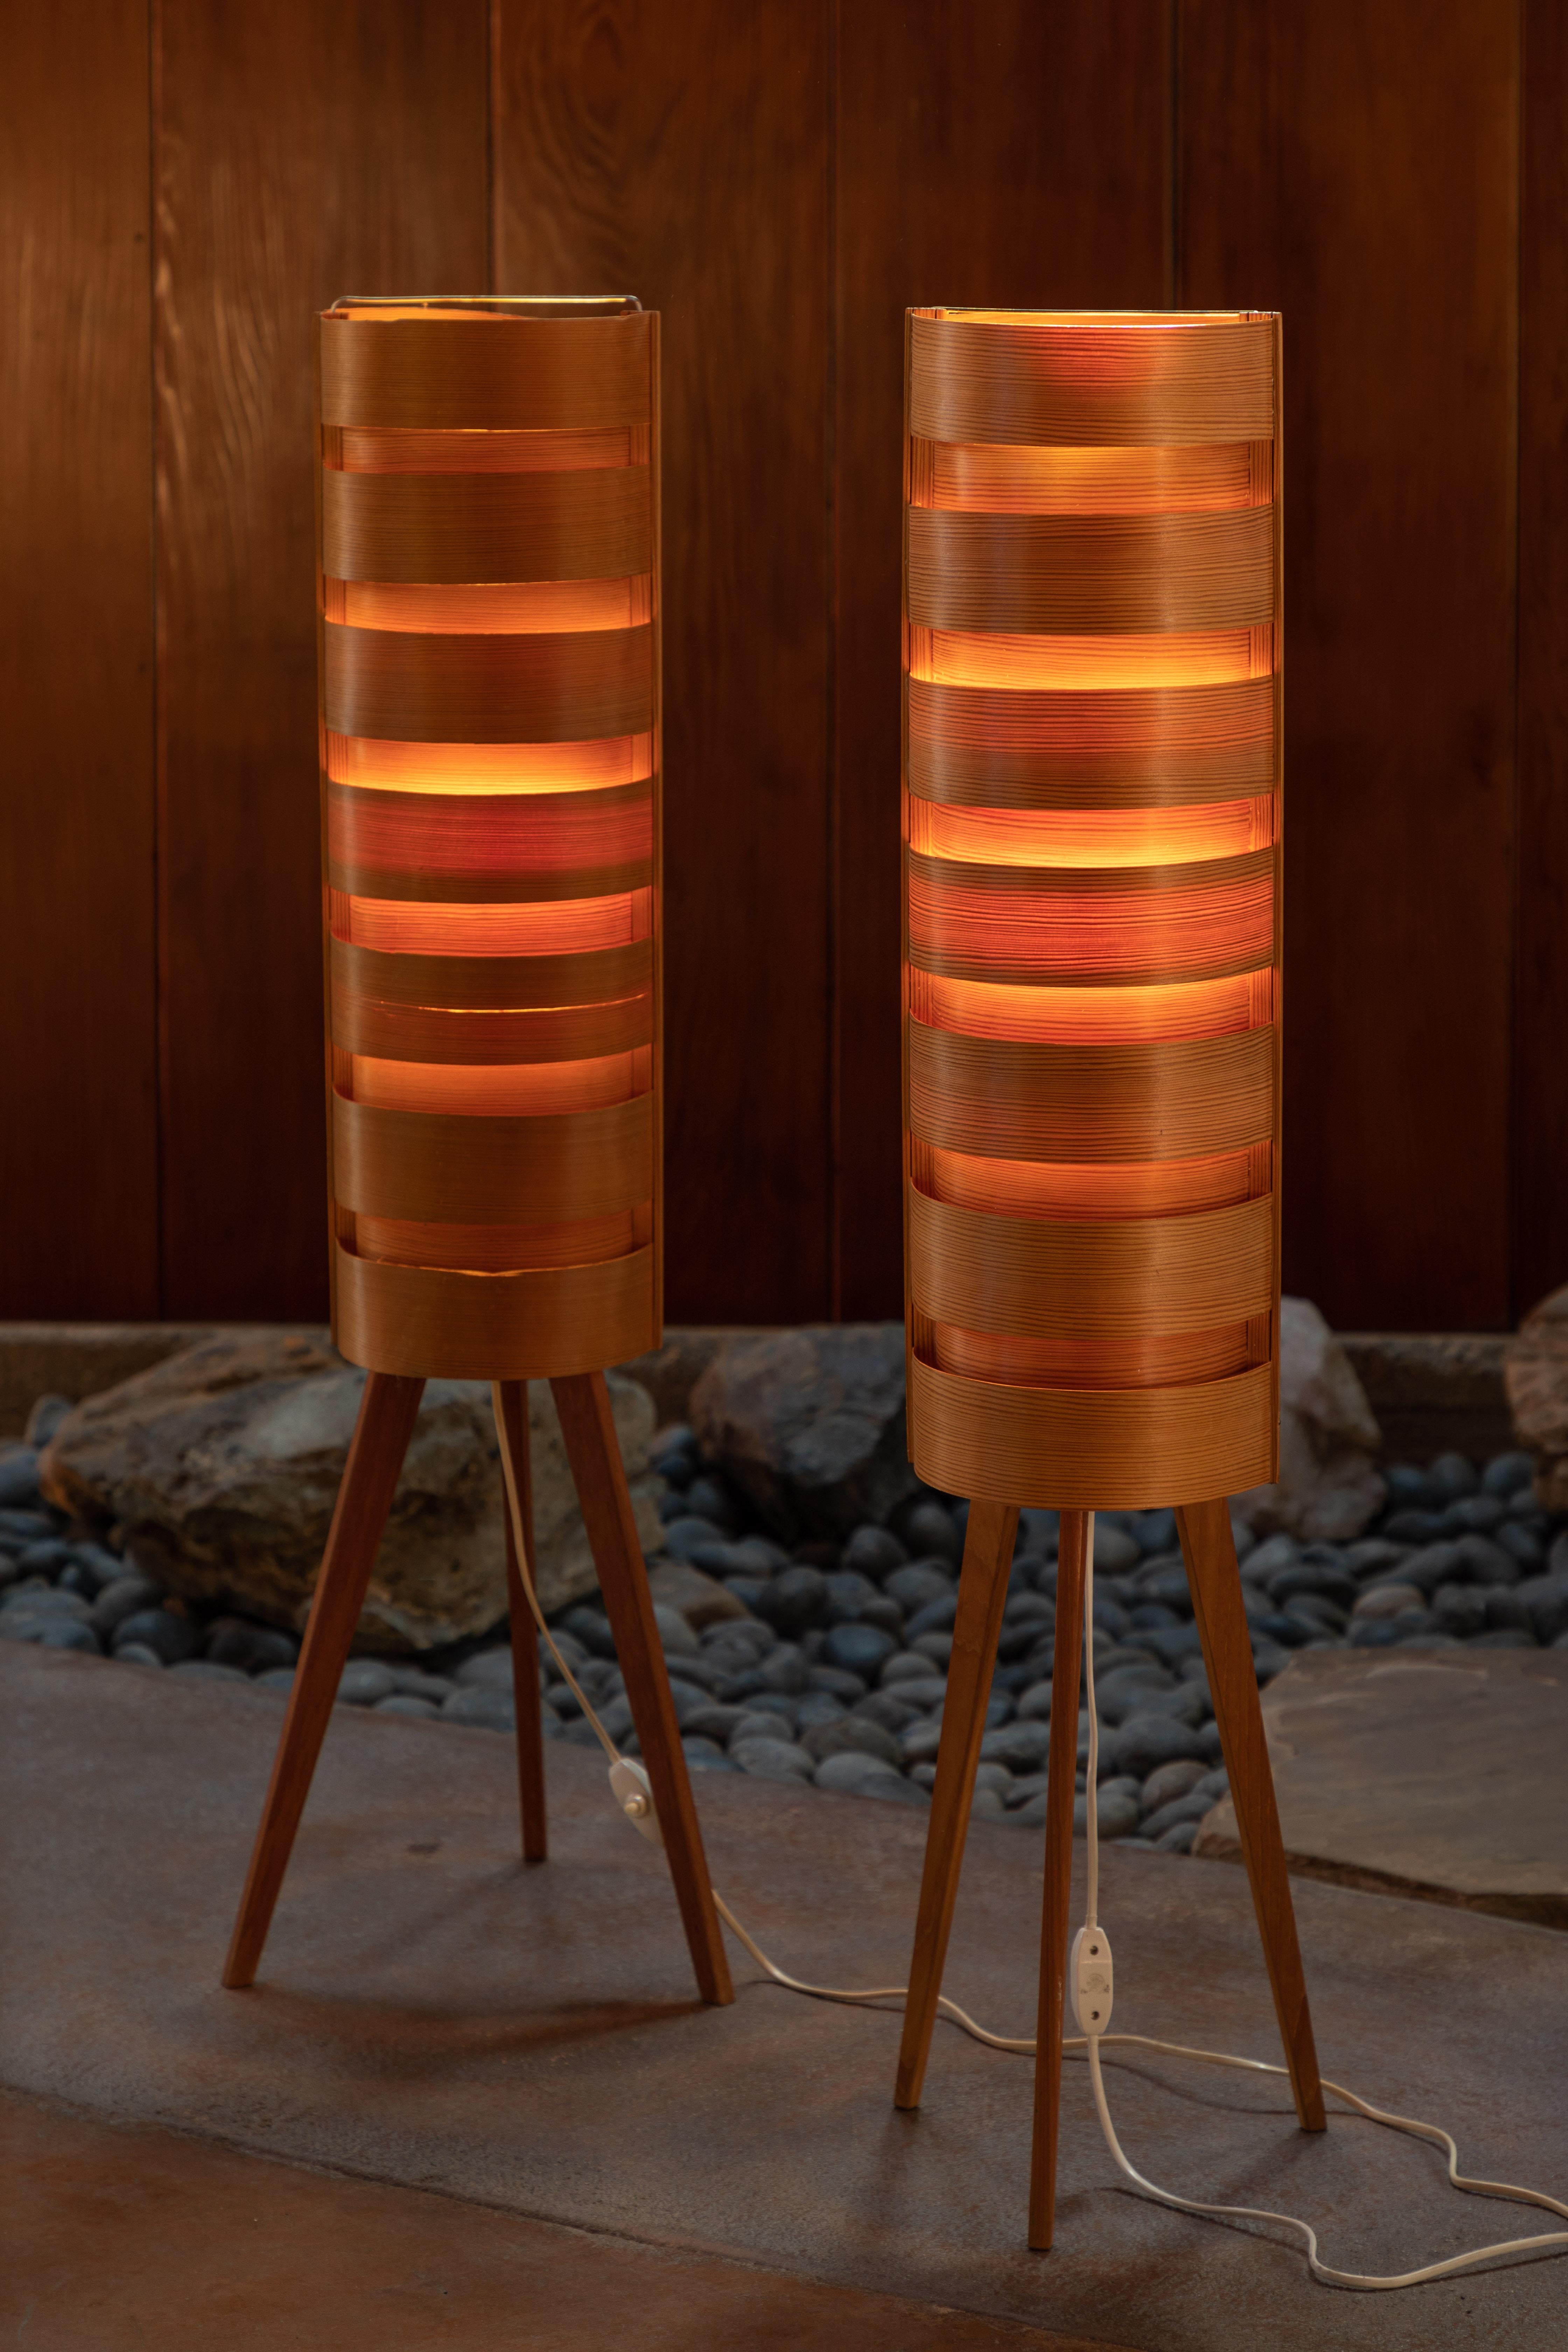 Pair of 1960s Hans-Agne Jakobsson wood tripod floor lamps for AB Ellysett. Designed and produced by Jakobsson in Markaryd, Sweden and executed in thin bentwood with solid wood tripod legs. A uniquely architectural and rare lamp that is so incredibly